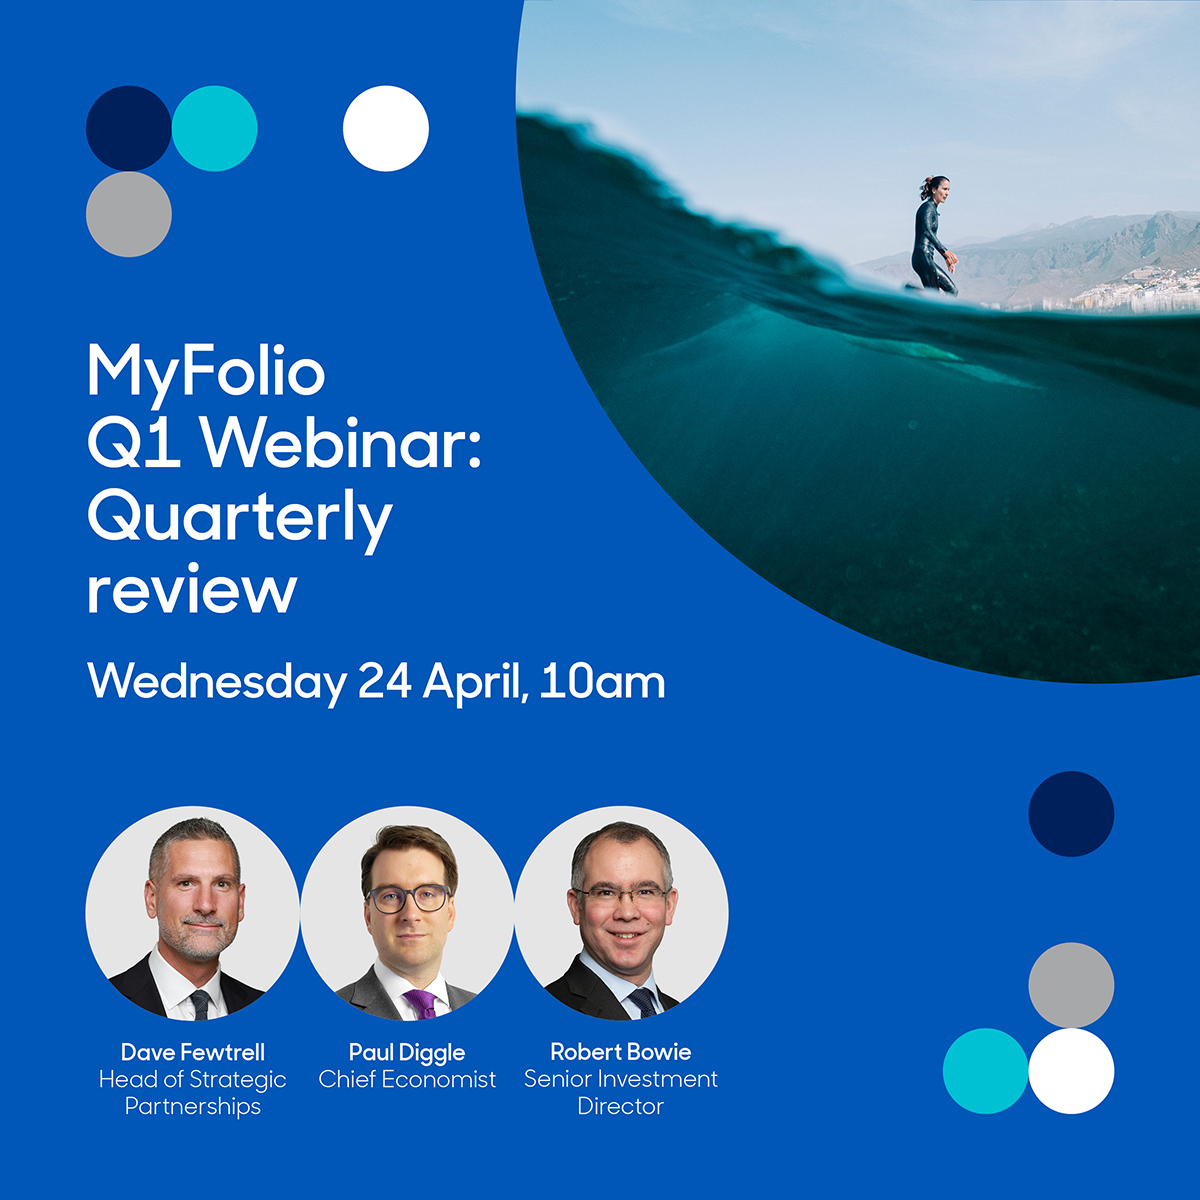 Two days to go - sign up to our MyFolio Q1 webinar, featuring a macroeconomic outlook and a fund performance review. ow.ly/3pPy50Rb6nB Professional investors only. Capital at risk